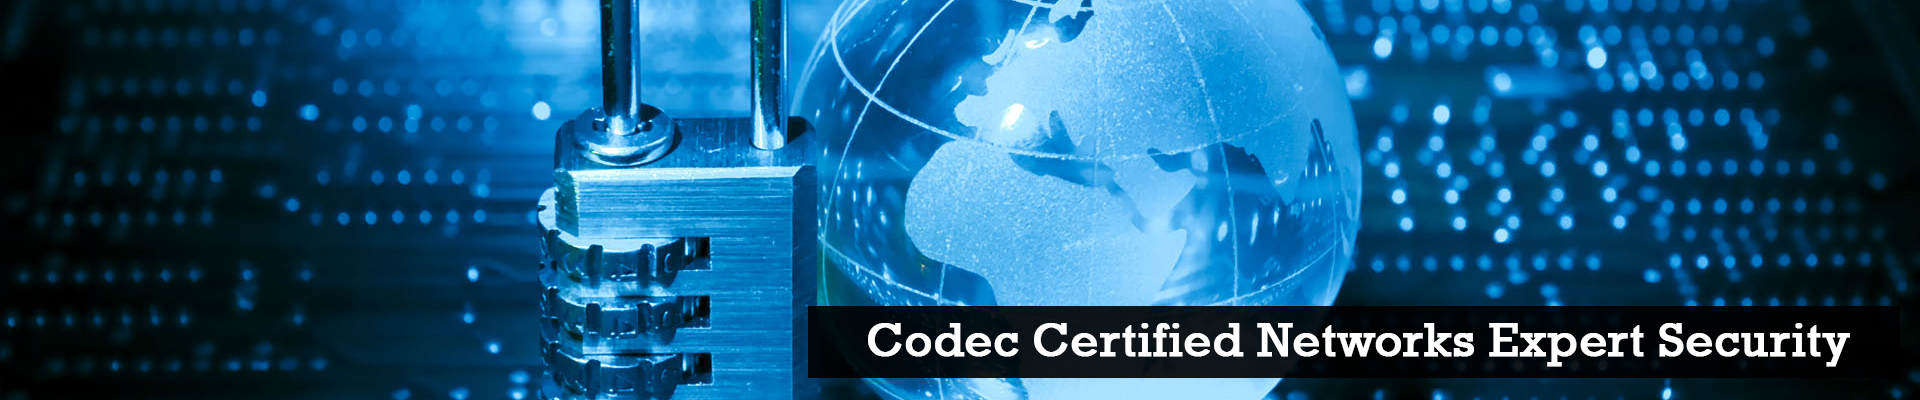 CISCO-Certified-Internetwork-Expert-CCIE-Security Training with Certification